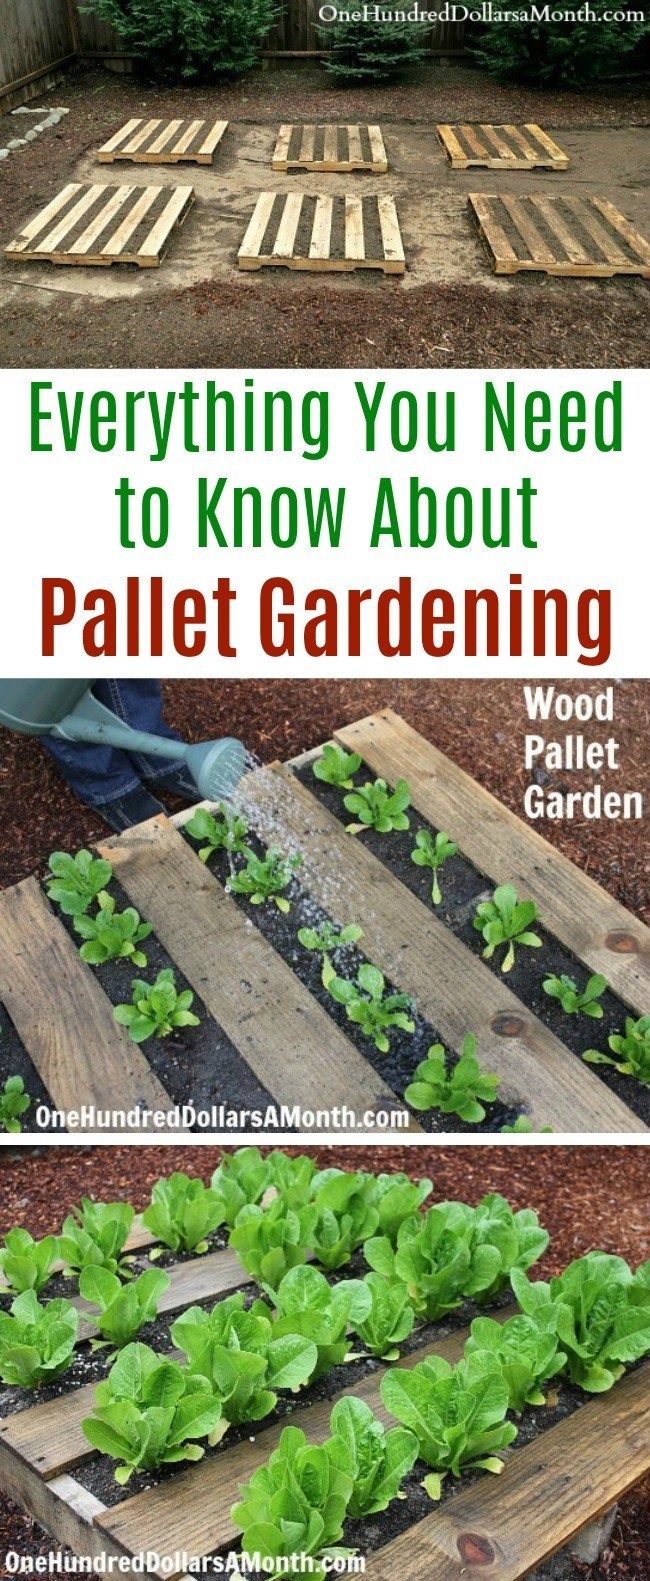 an outdoor garden with wooden pallets and plants growing in it, text overlaying everything you need to know about pallet gardening